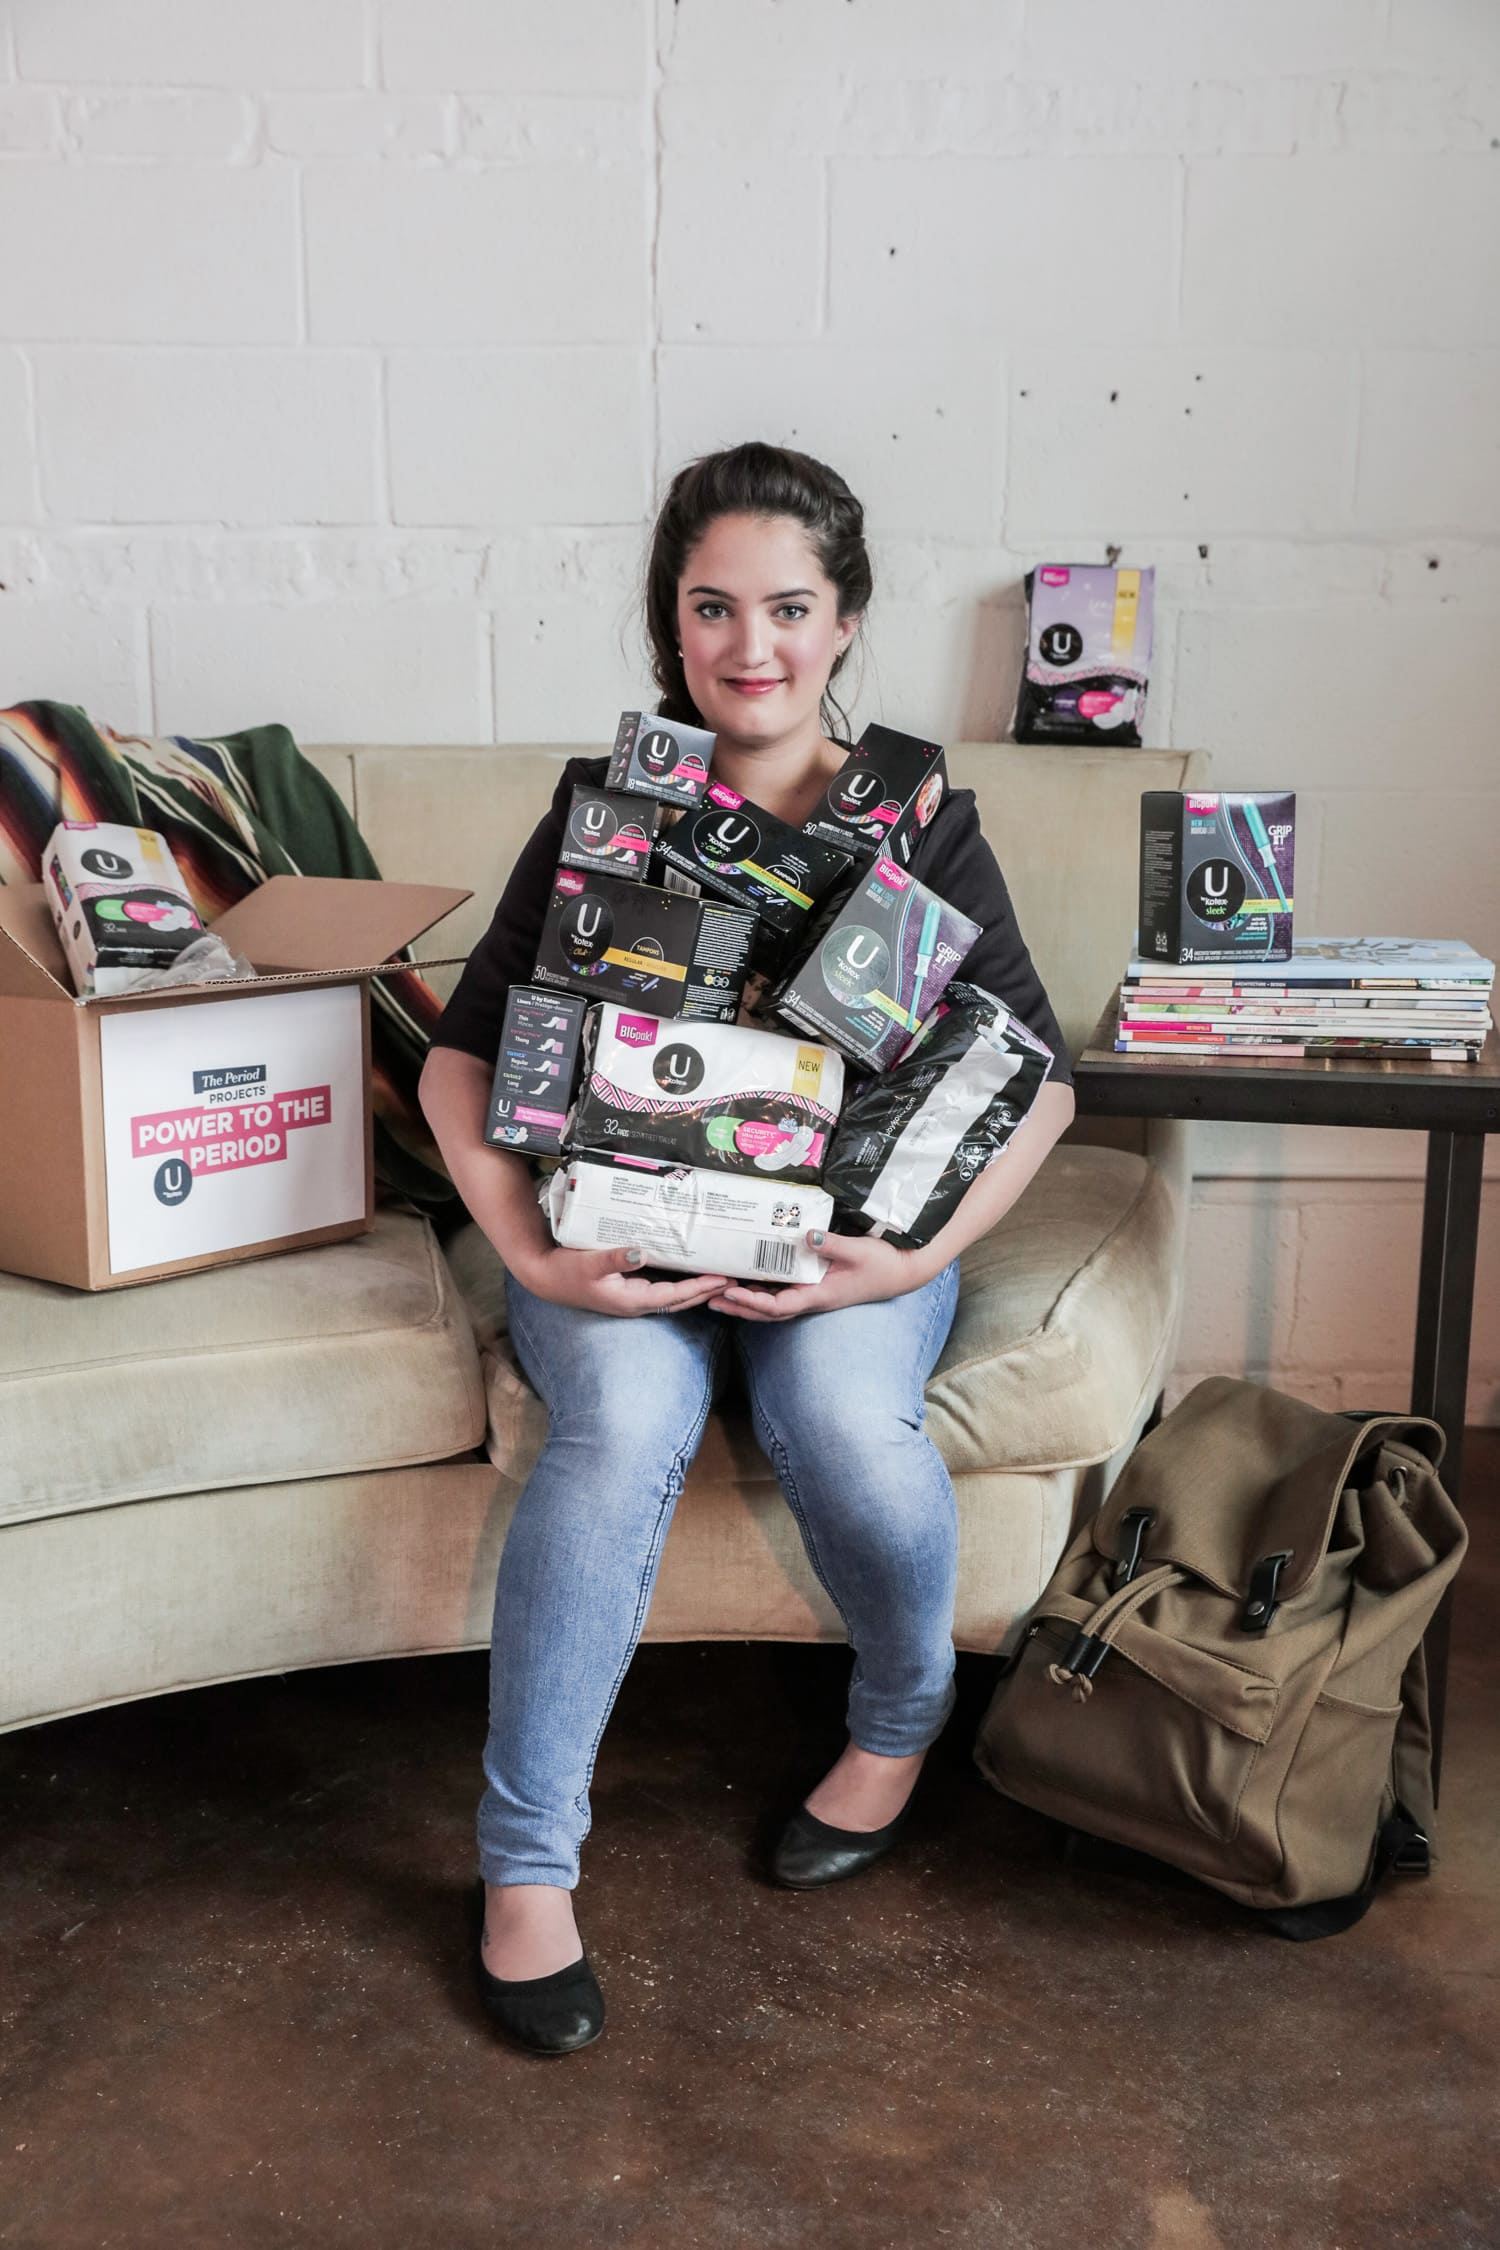 Did you know that many of the 5.3 million homeless Americans have limited access to period projects? Learn how you can fight this problem with the Power to the Period Donation Drive by U By Kotex and DoSomething.org. Let's join together to give the homeless community access to period products.